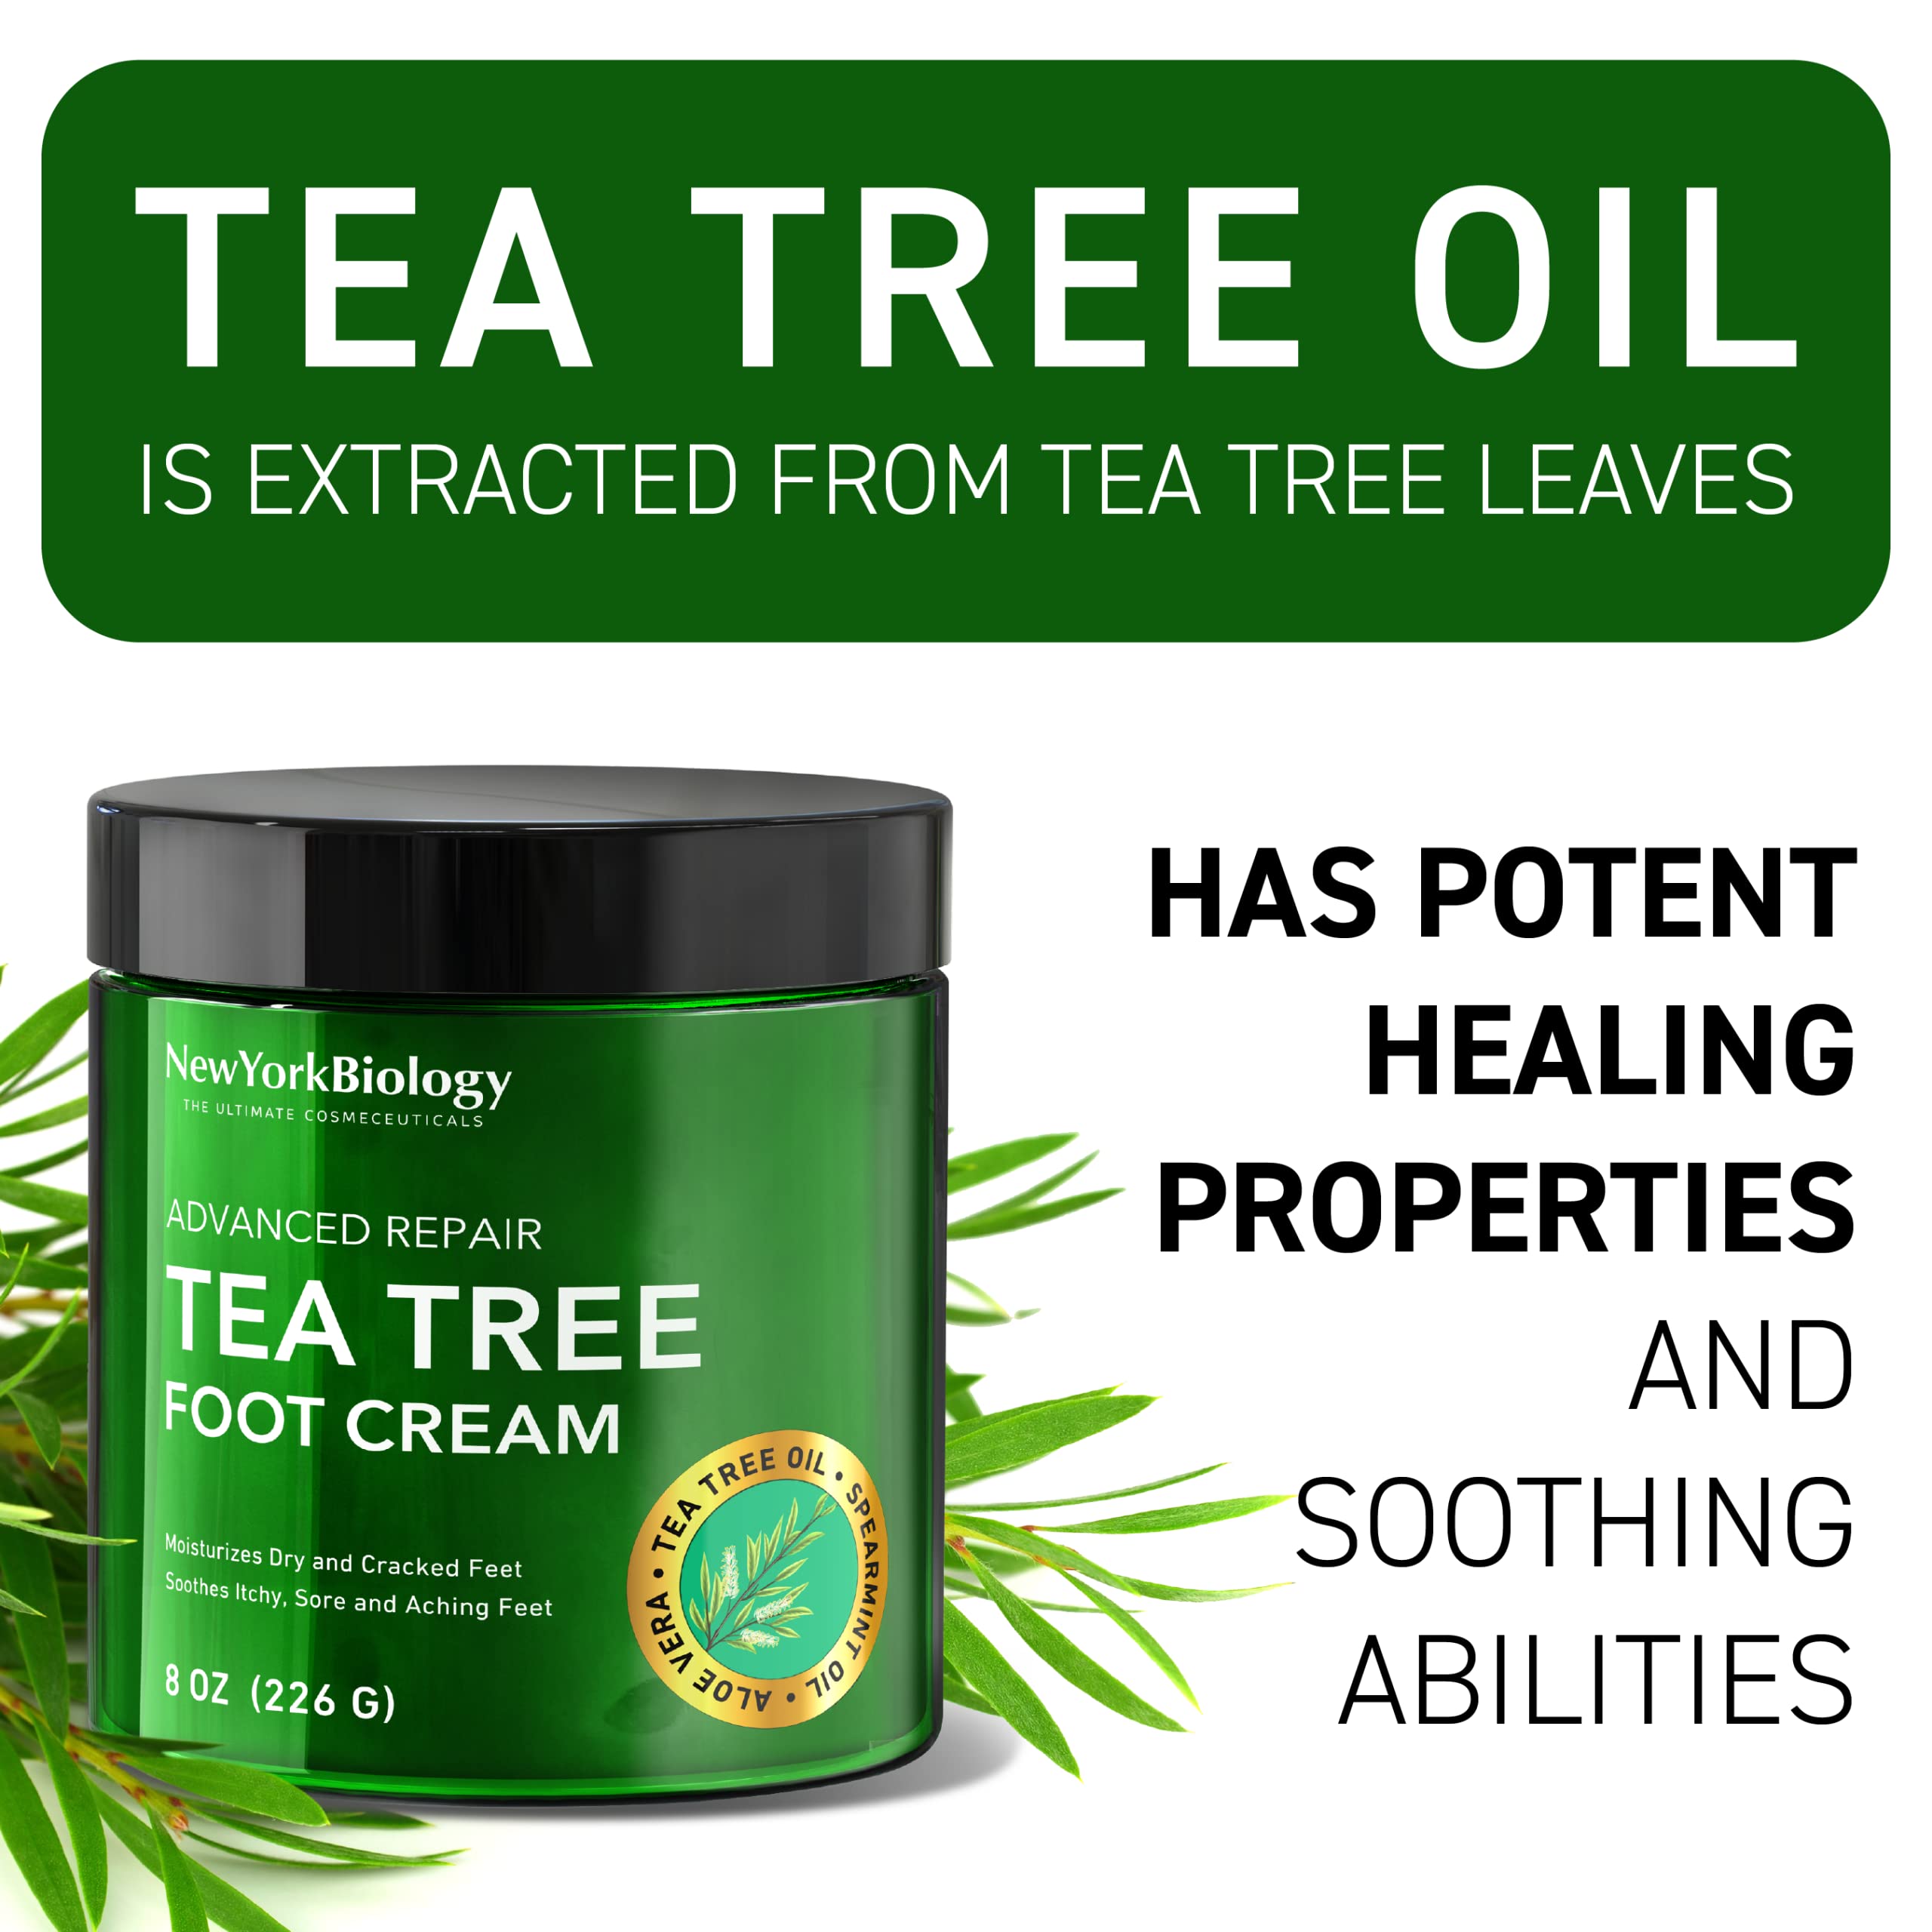 New York Biology Tea Tree Oil Foot Cream for Dry Cracked Feet, Athletes Foot, Nail Fungus, Jock Itch, Ringworm, Cracked Heels and Itchy Skin – Foot Cream - 8 oz